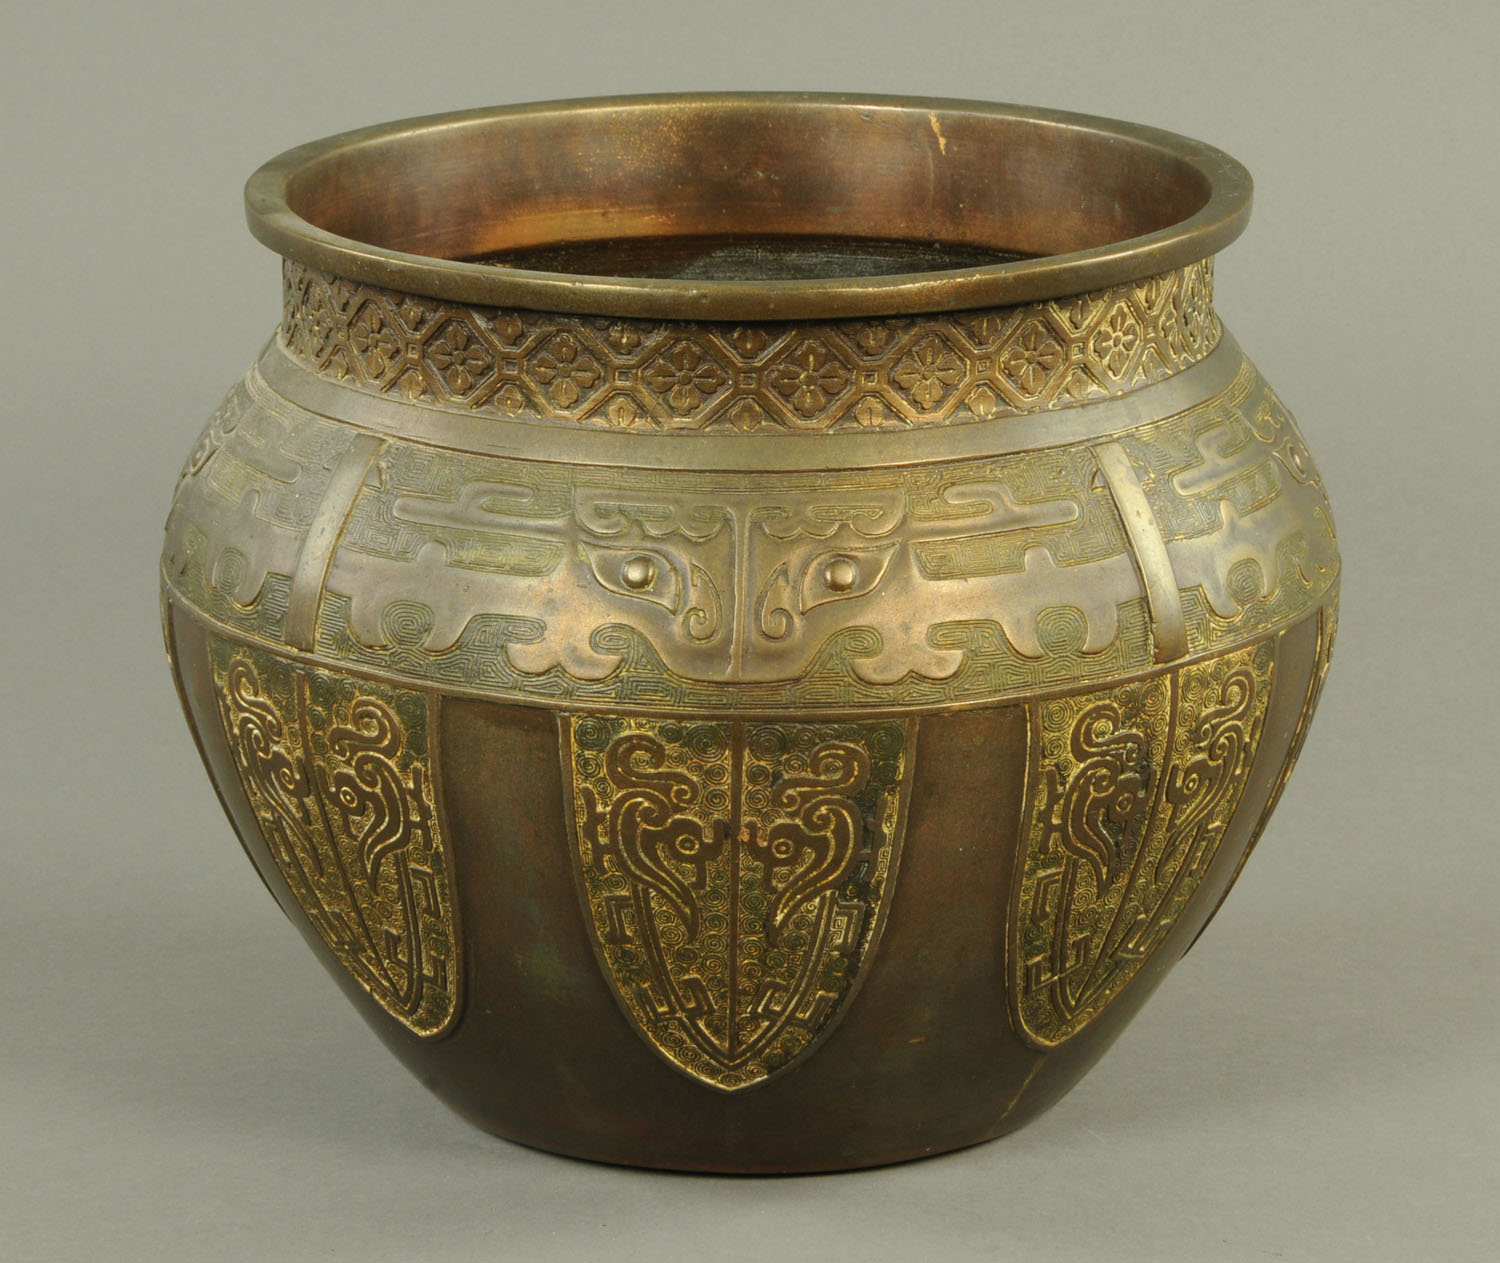 A large 19th century Chinese bronze jardiniere. Diameter +/- 38 cm (see illustration).